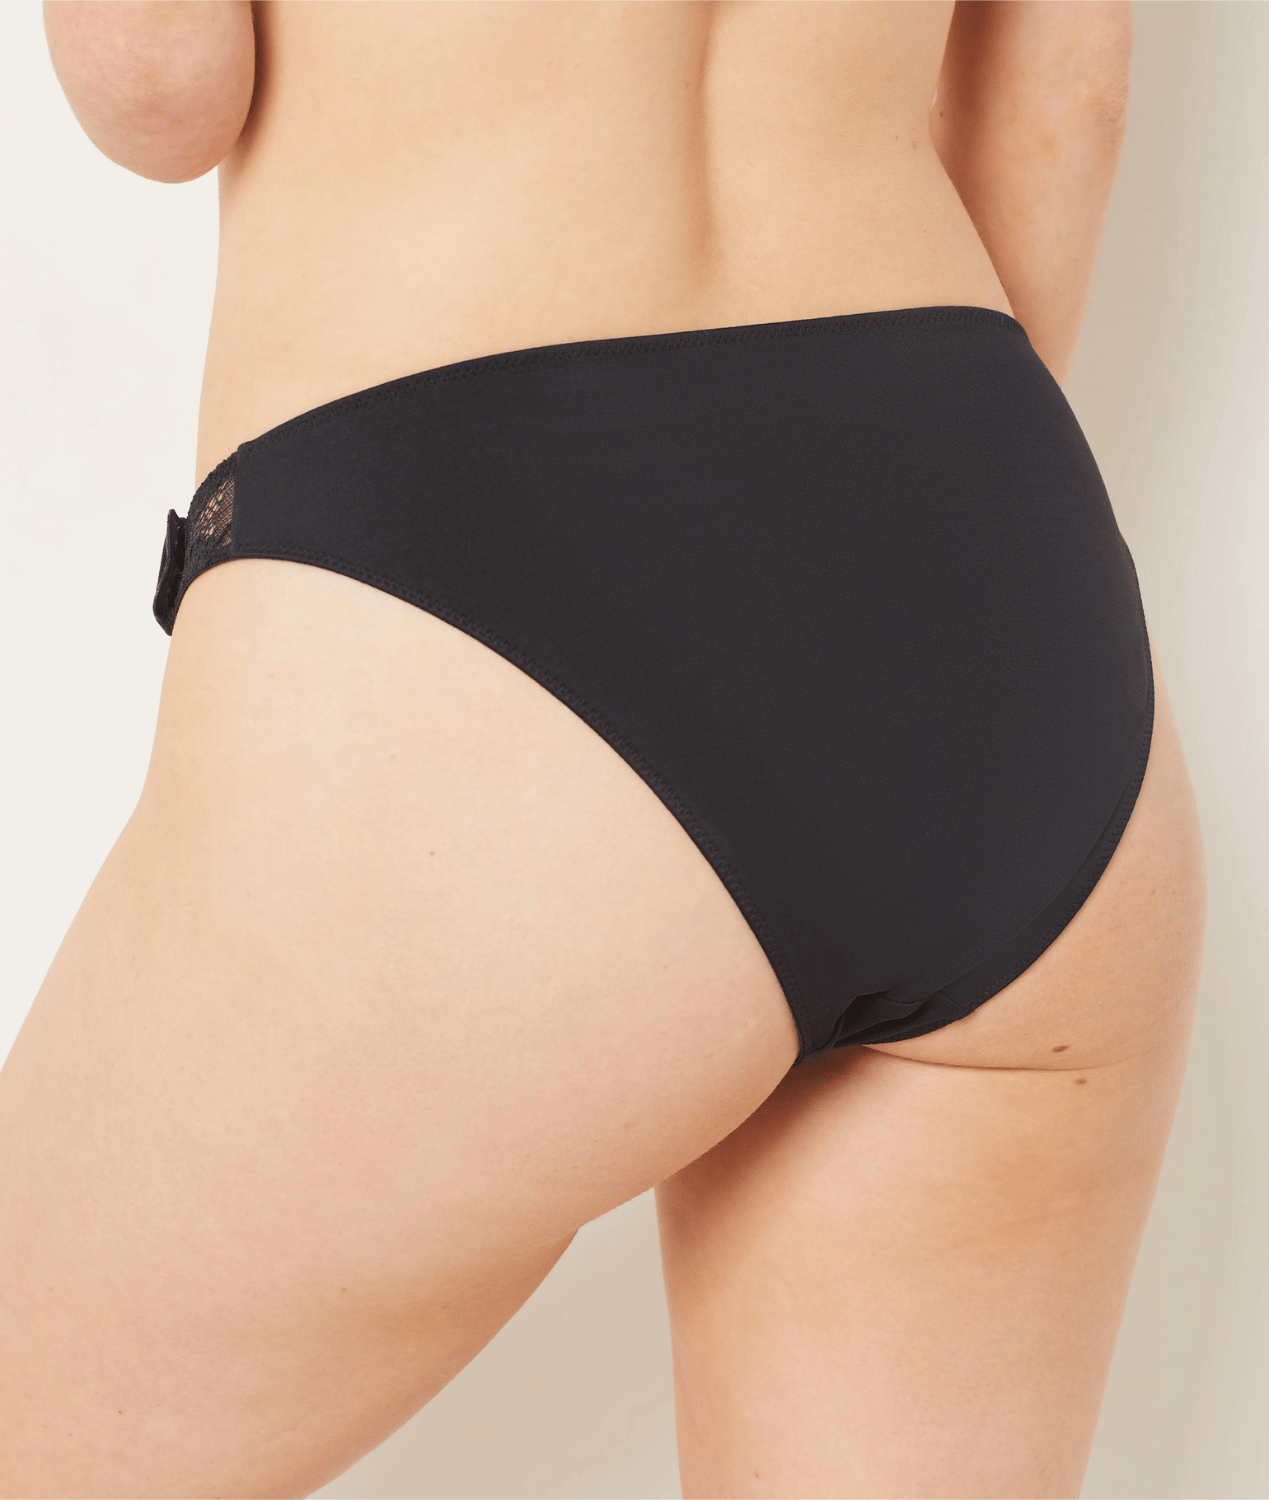 The Everyday Bikini in Black (Side-Opening Underwear with Magnets)